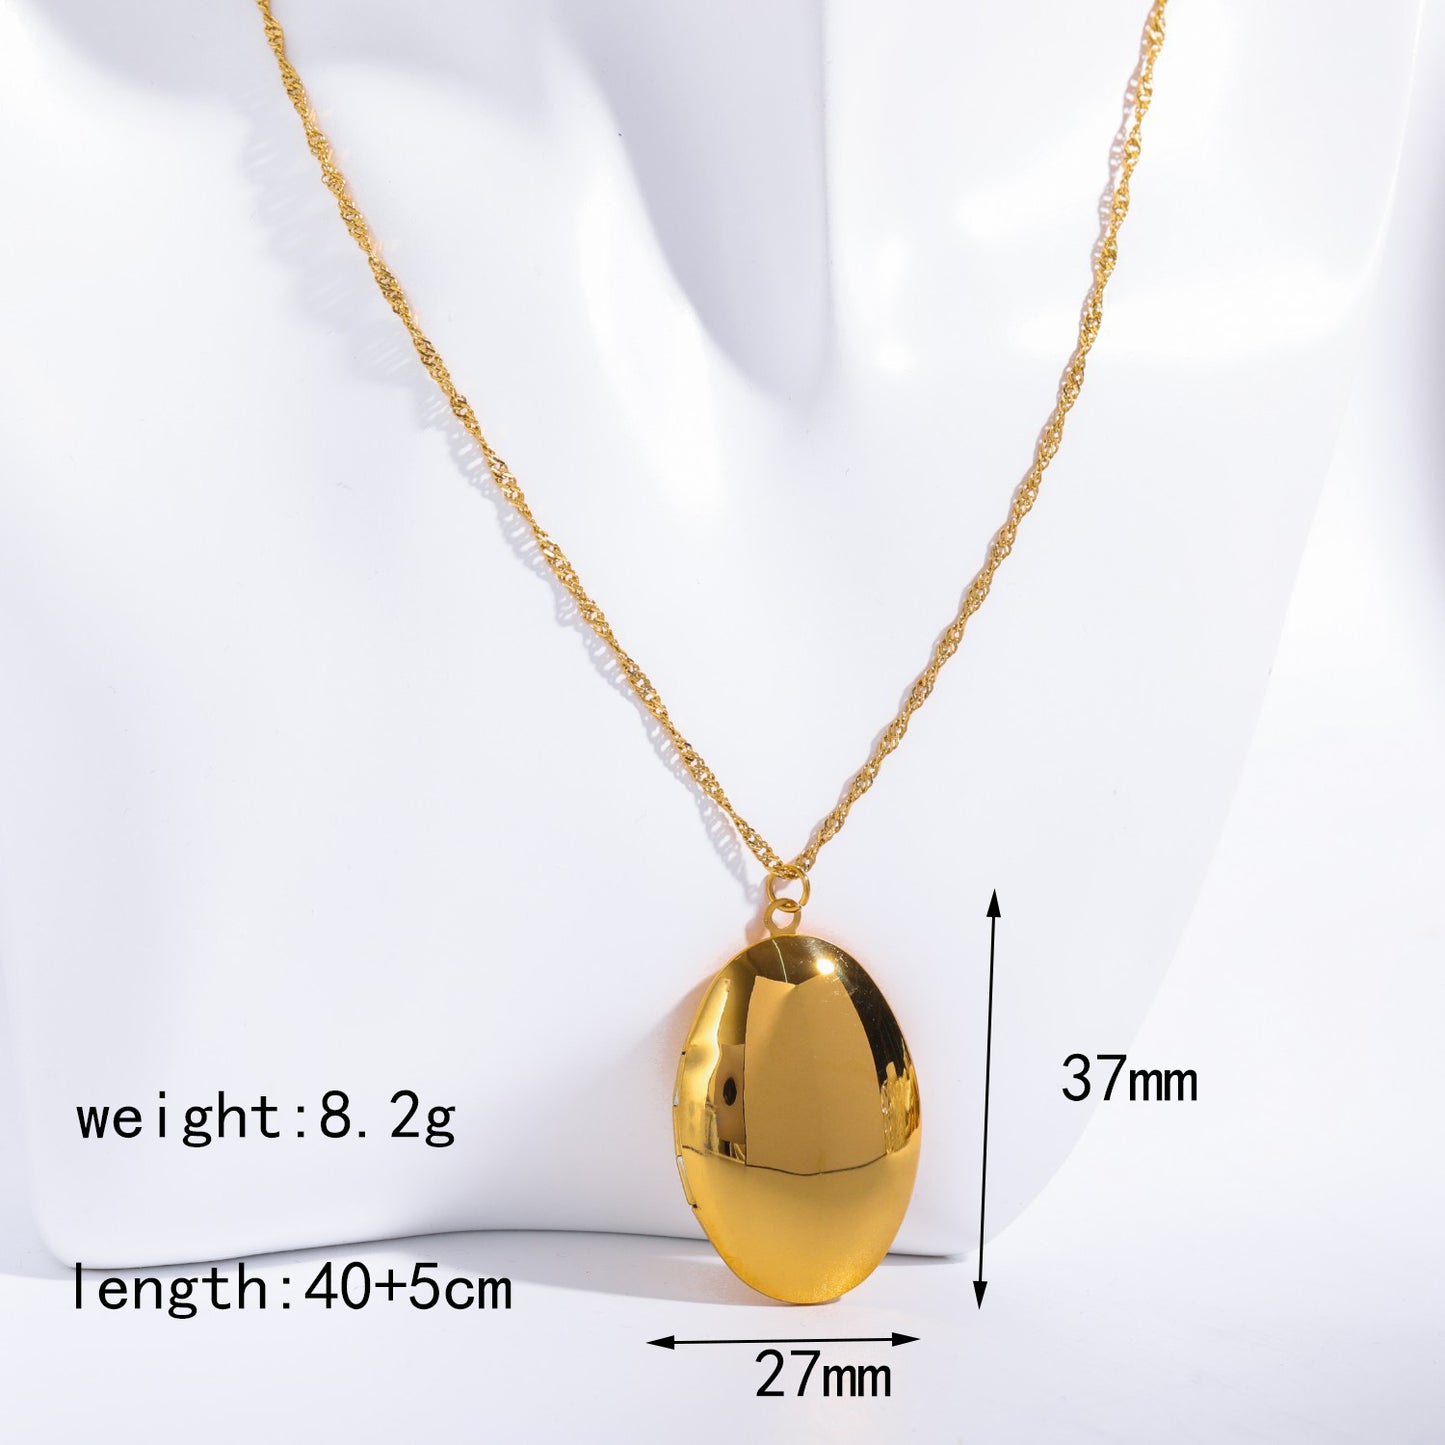 heart shape stainless steel plating 18k gold plated pendant necklace